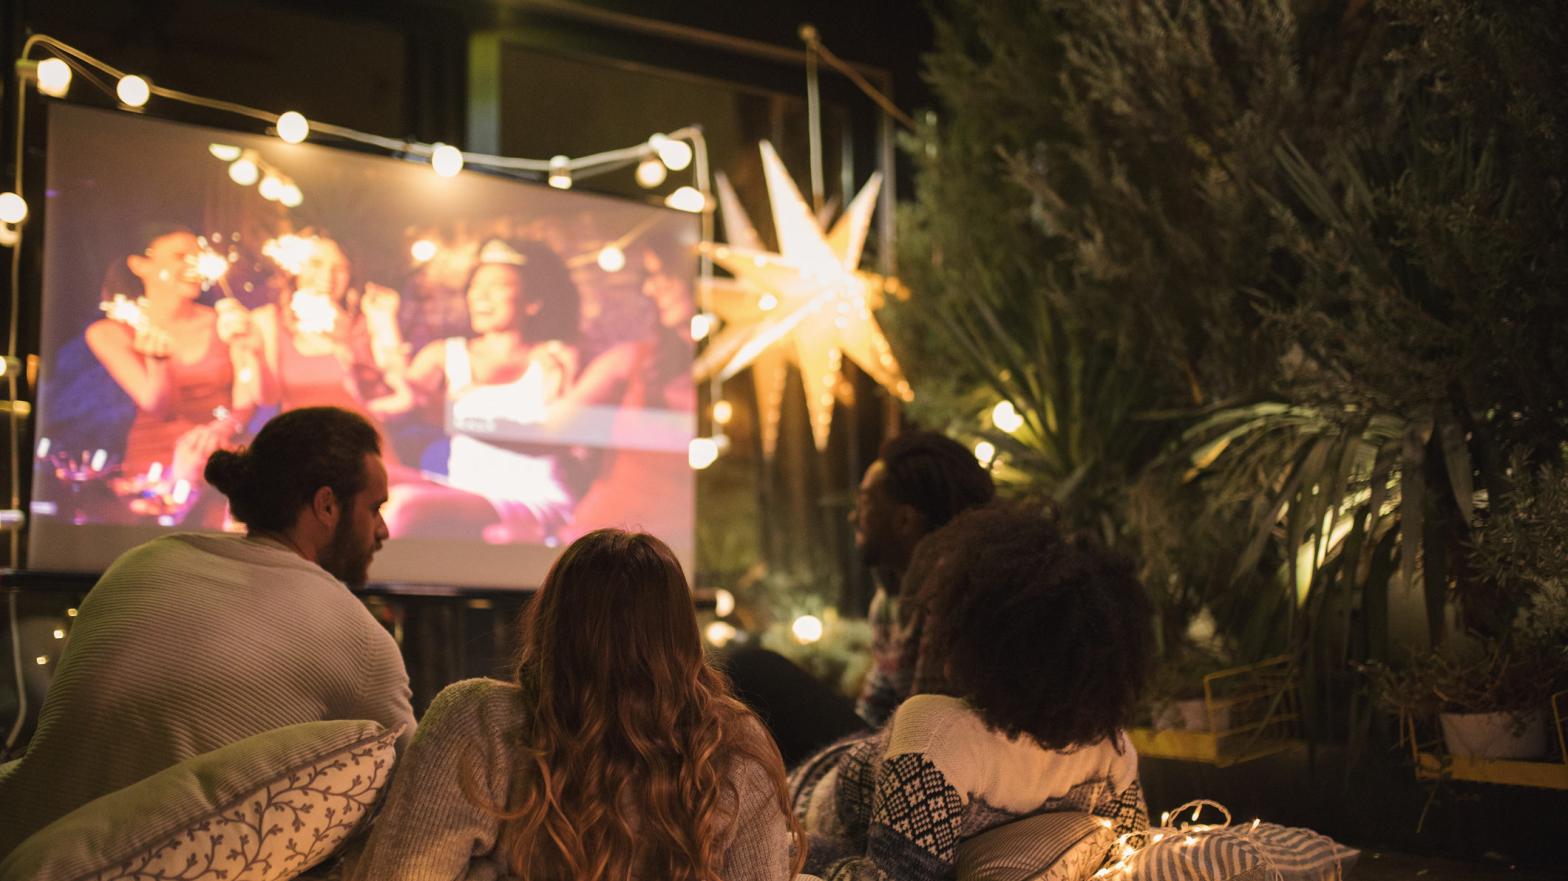 Use a mini projector for a fun movie night with friends